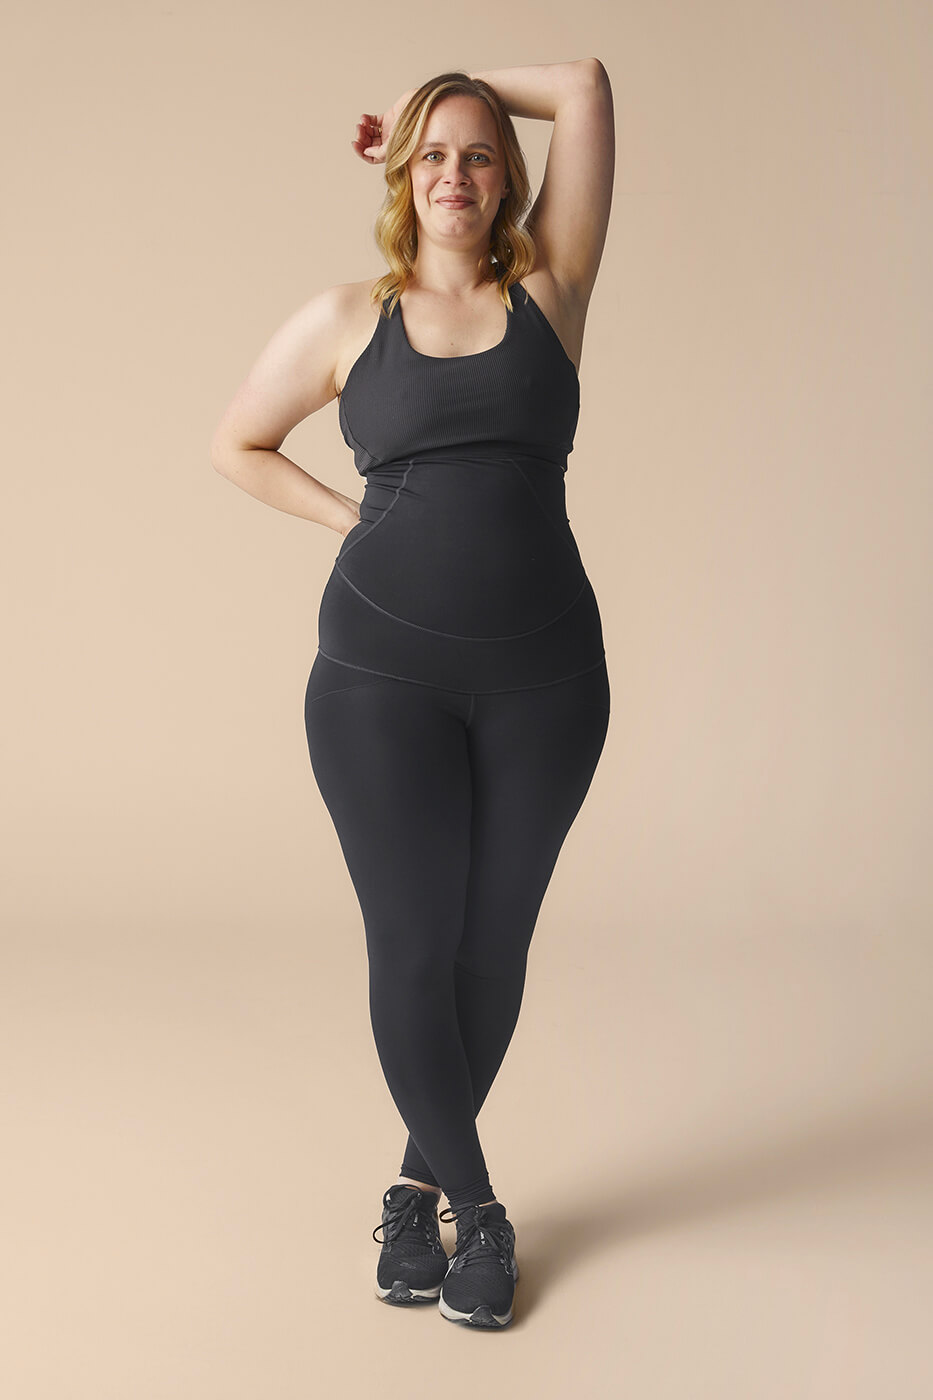 Is It Safe to Wear Spanx During Pregnancy?